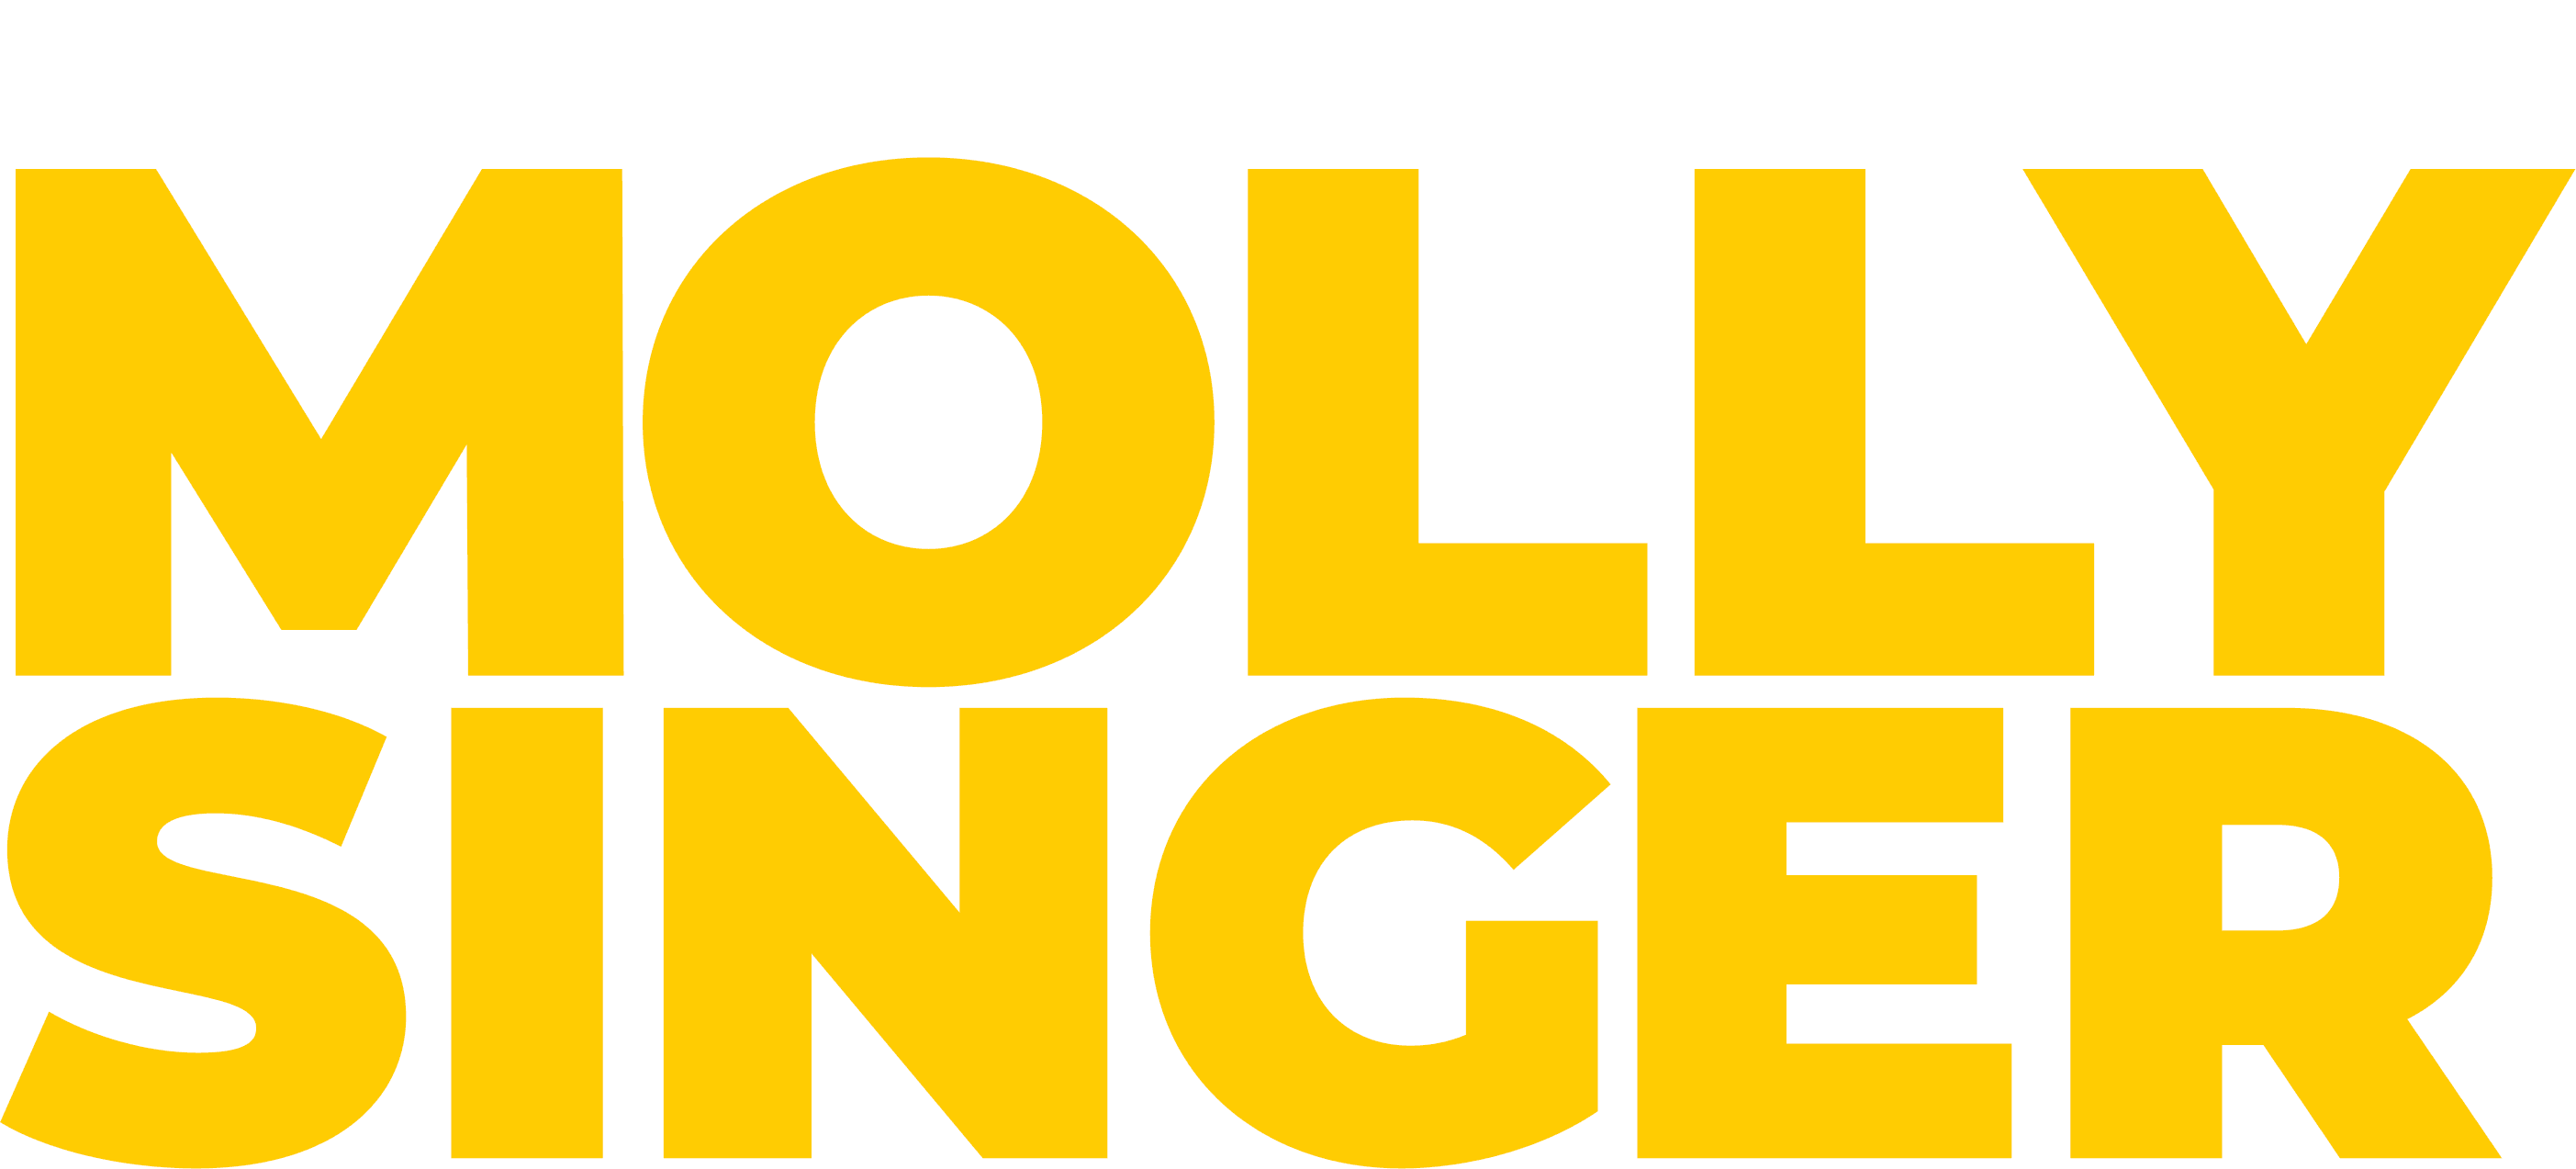 The Re-Education of Molly Singer logo